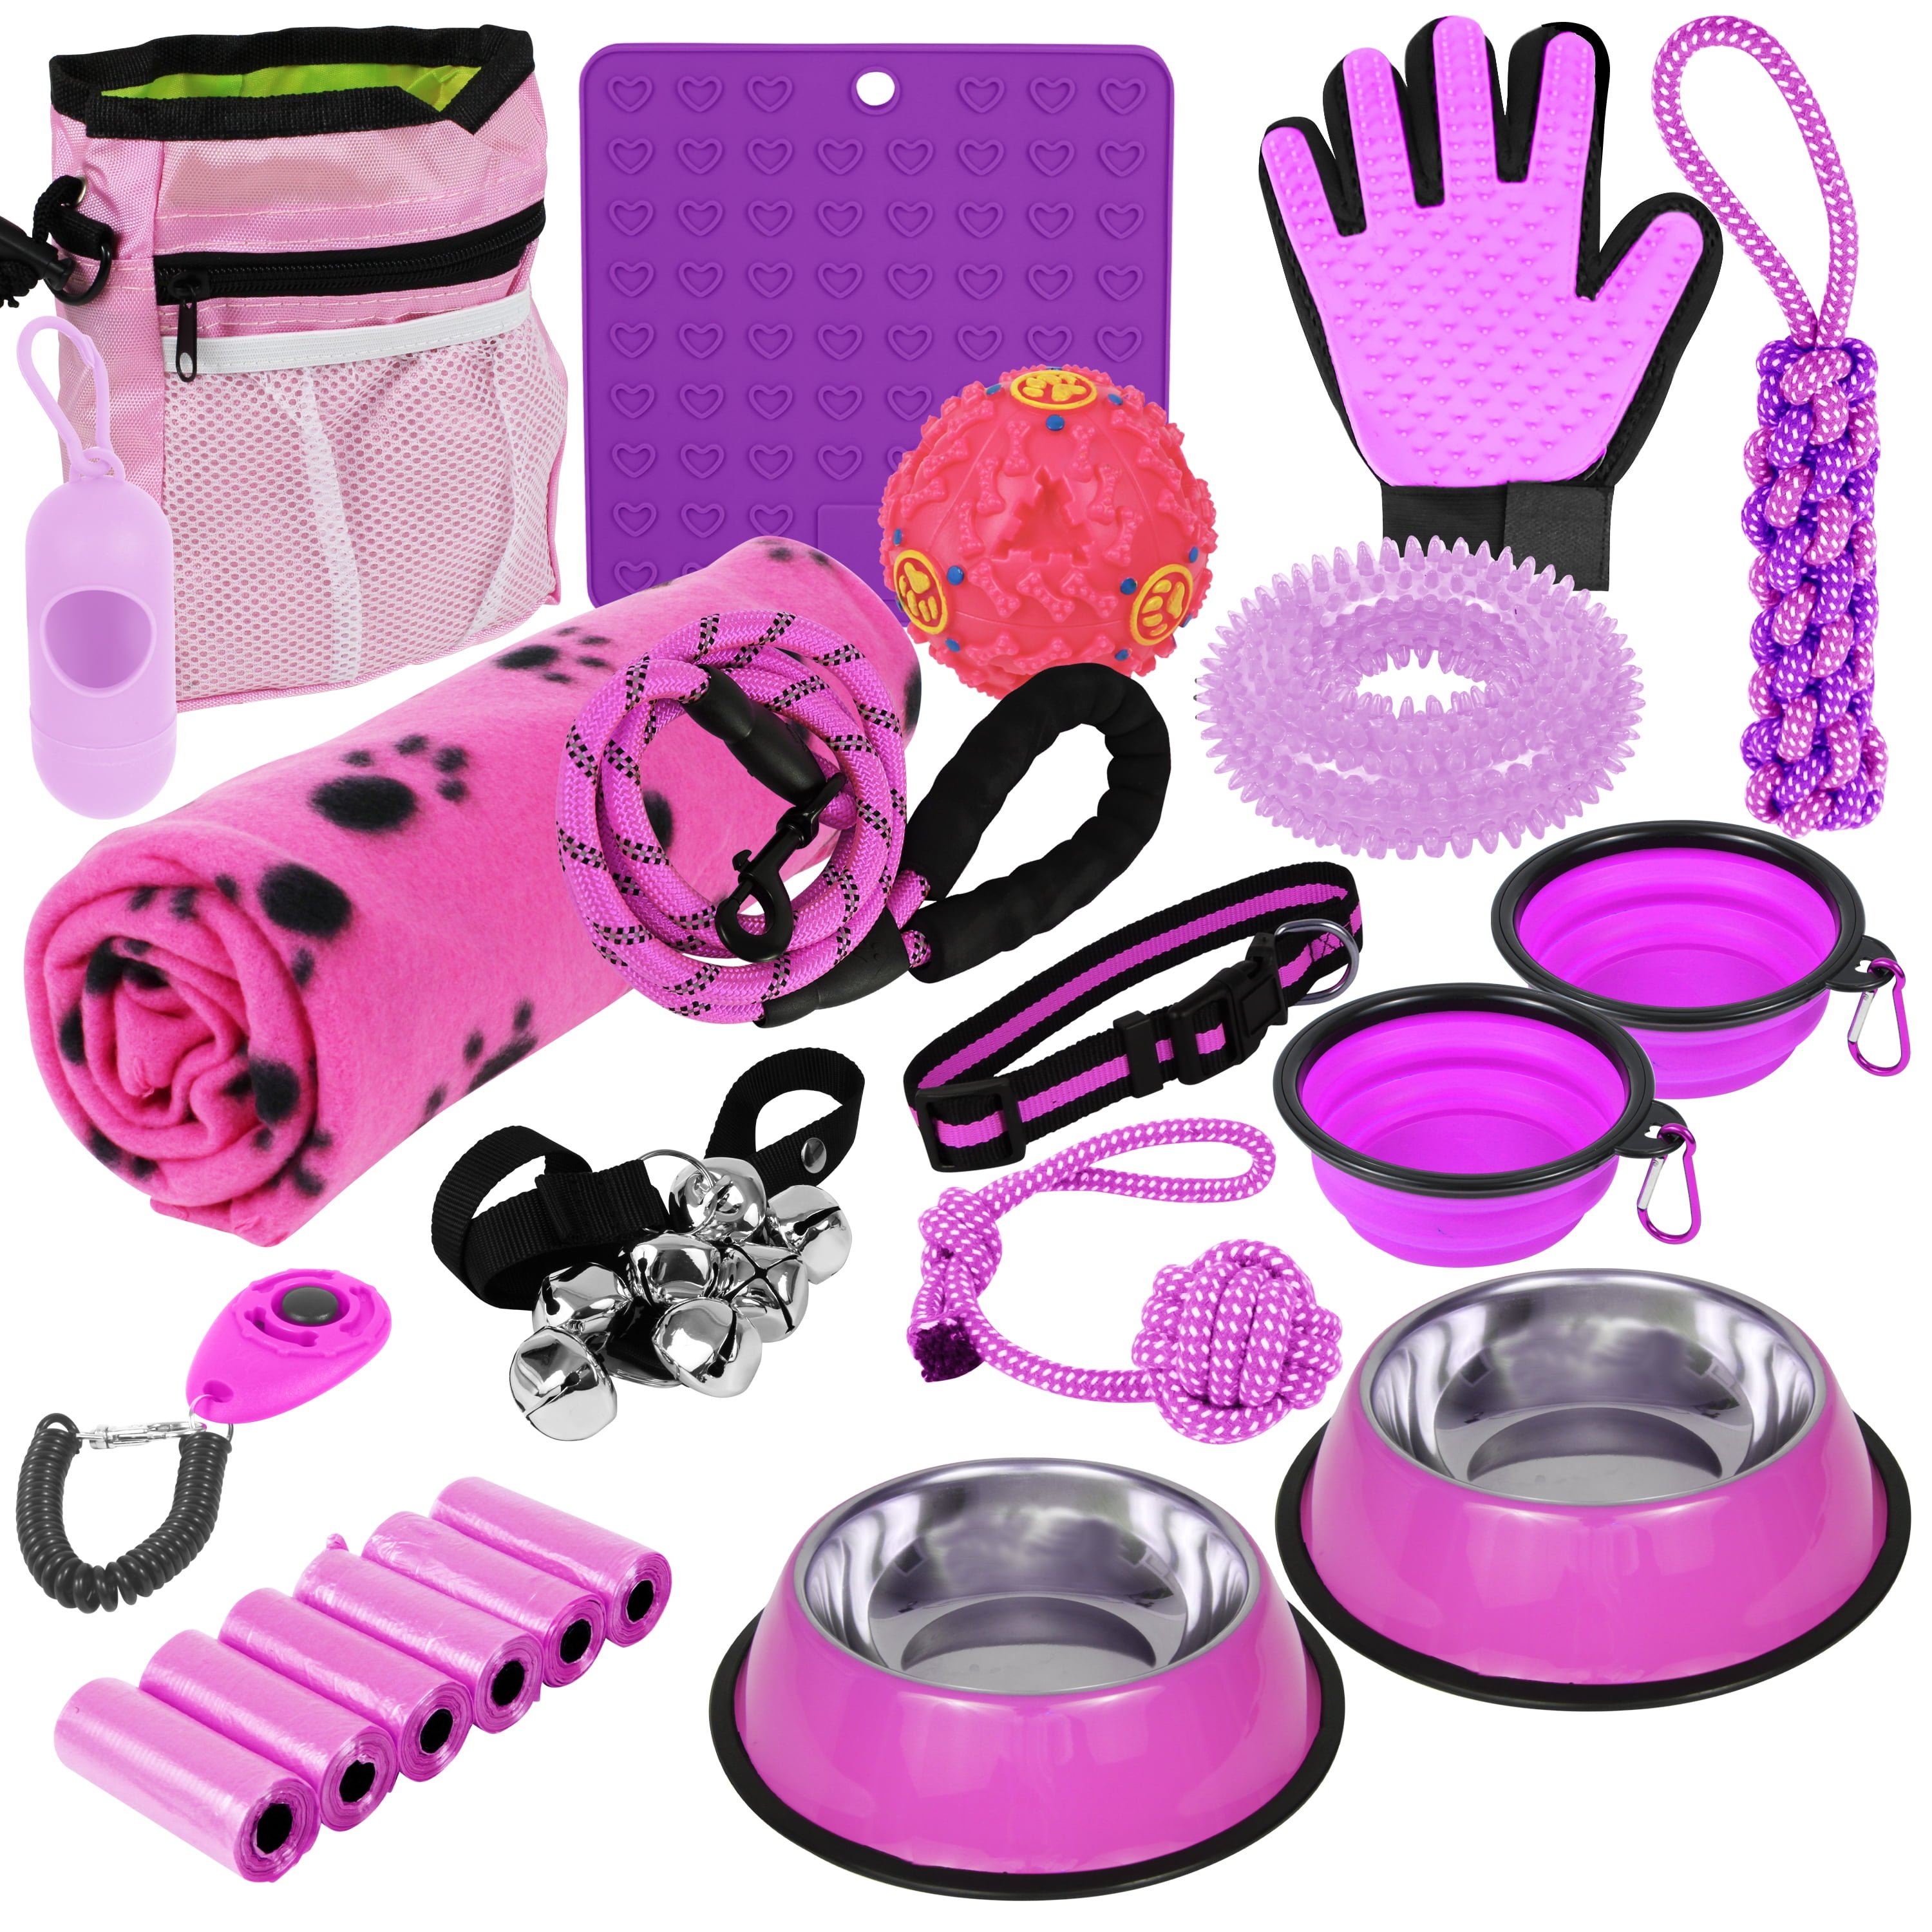 Puppy Starter Kit - Supplies, Accessories, 23 pc Set with Feeding Bowls,  Lick Mat, Teaching Aids, Leash, Collar, Toys, Potty Training Bells & More  for